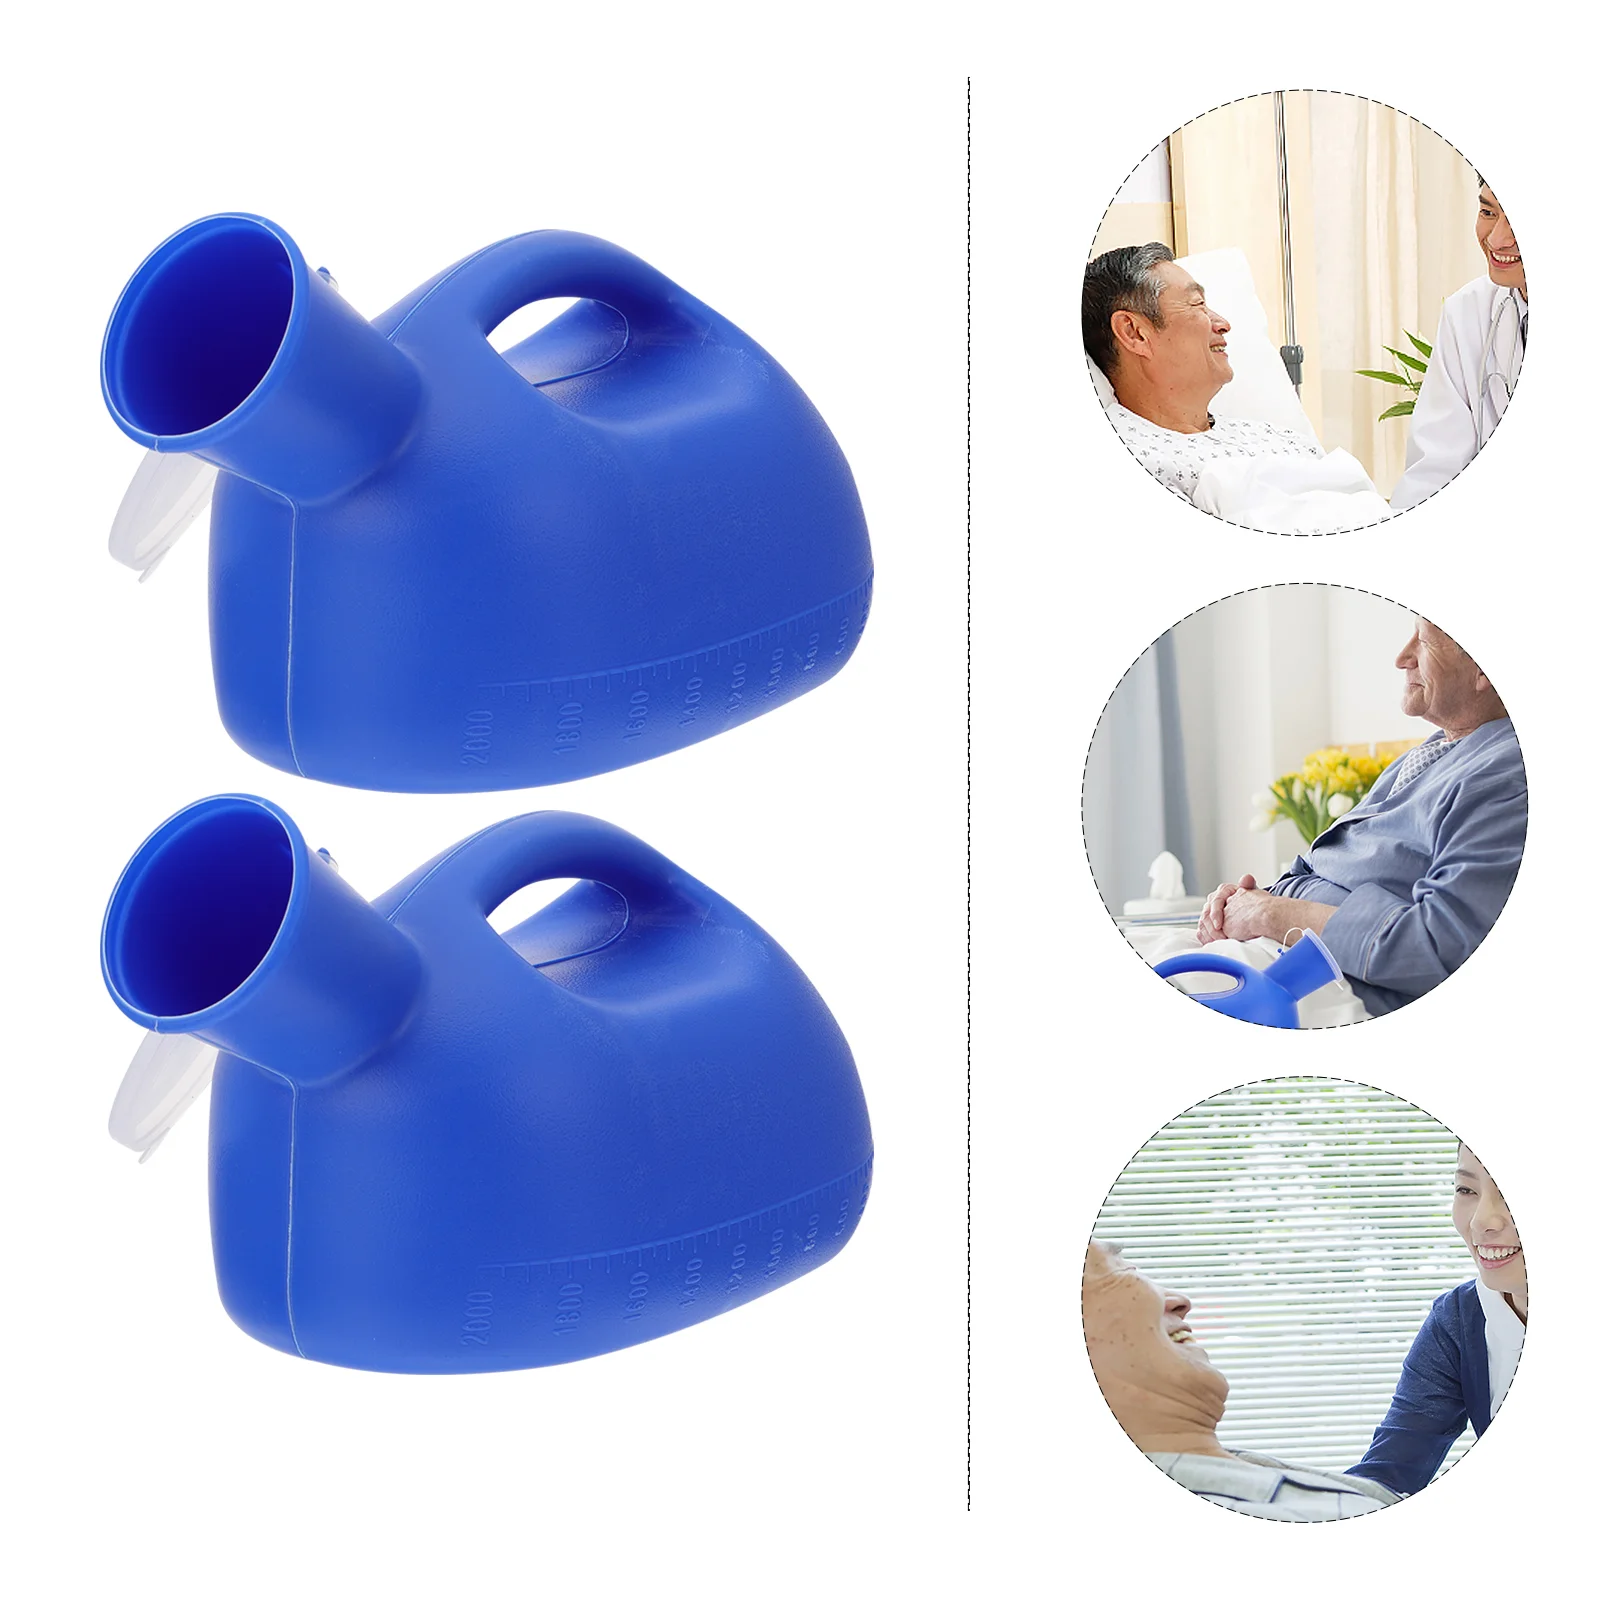 

Men Urinal Chamber Pot Urinals Portable Proof Bottles Spill Large Mens Male Bottle Urine Pan Bed Capacity Spittoon Pee